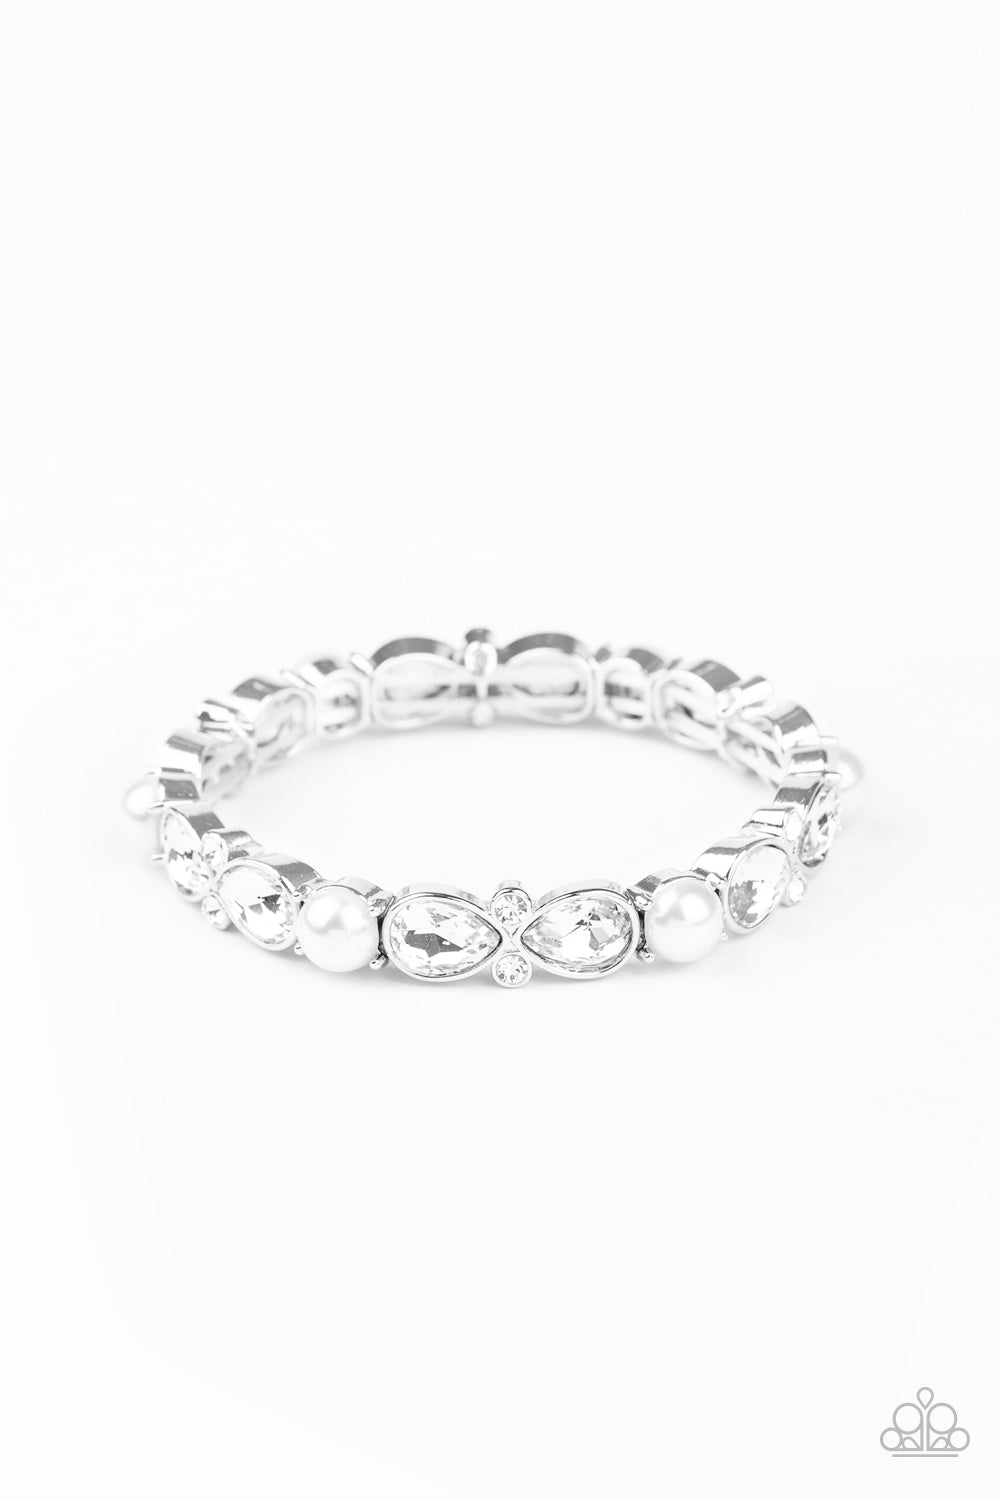 Paparazzi Frosted Finery - White Bracelet - A Finishing Touch 